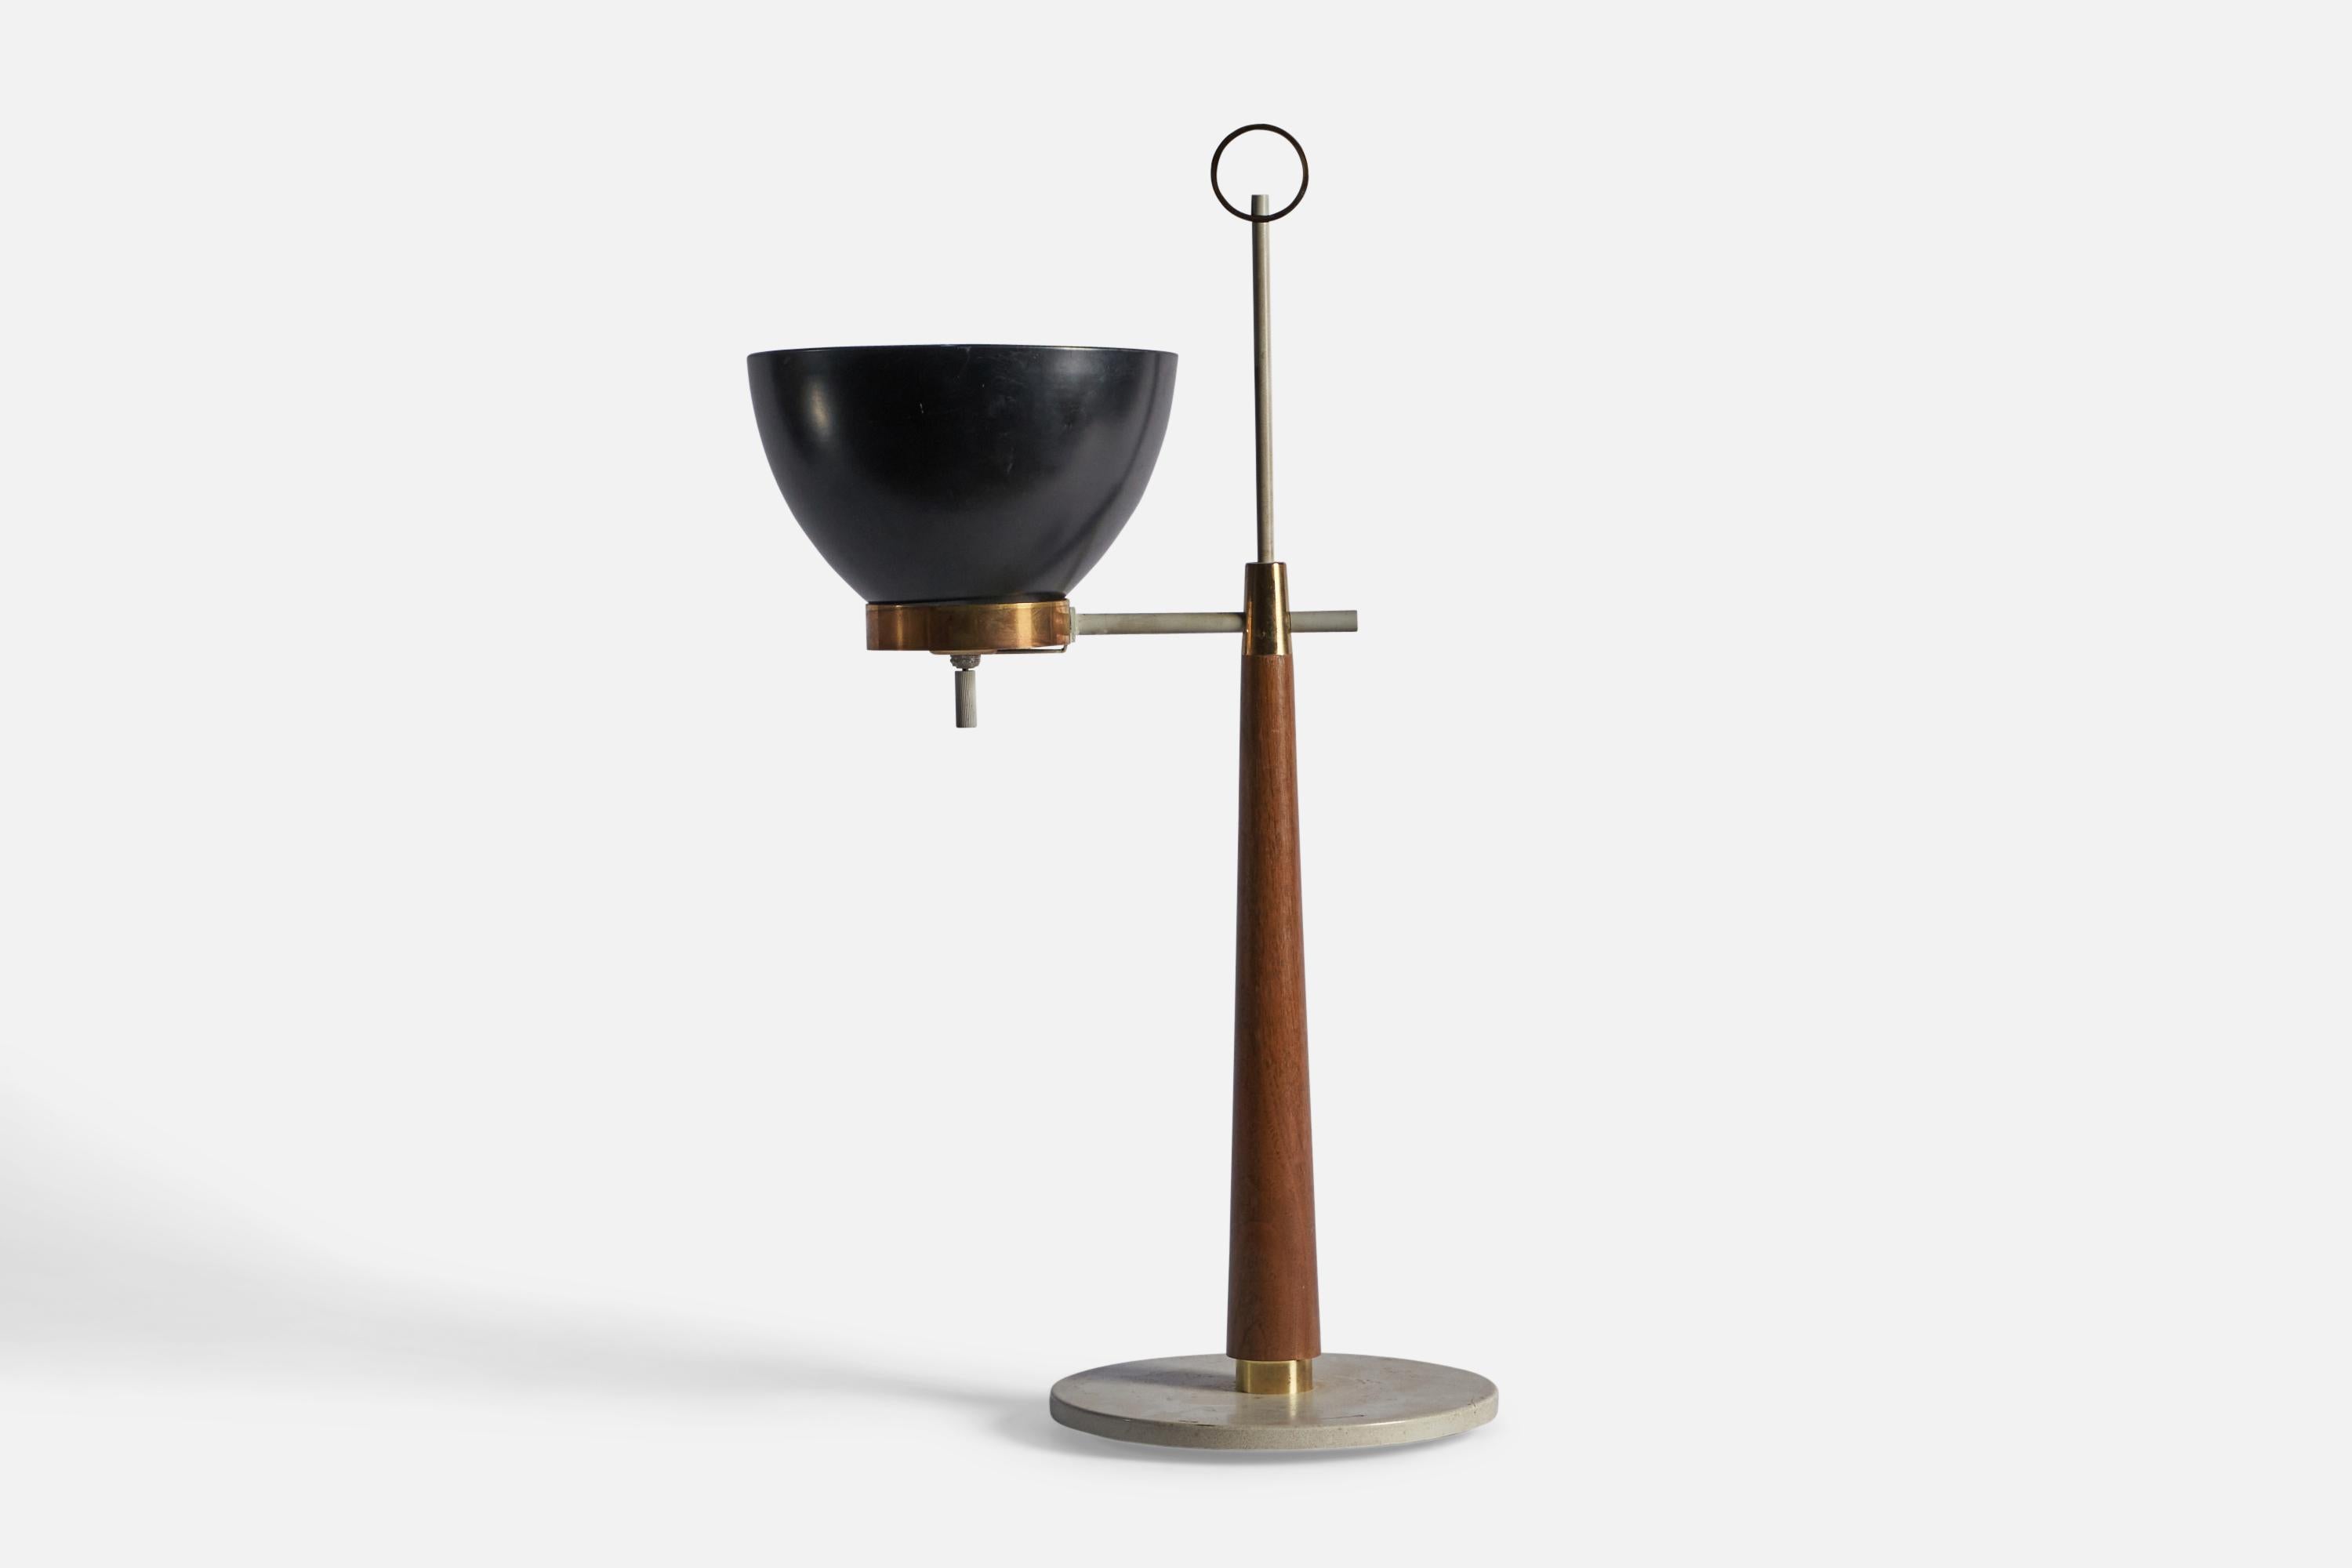 A black and grey-lacquered metal, brass and wood table lamp, designed and produced in the US, 1950s.

Overall Dimensions: 23.25